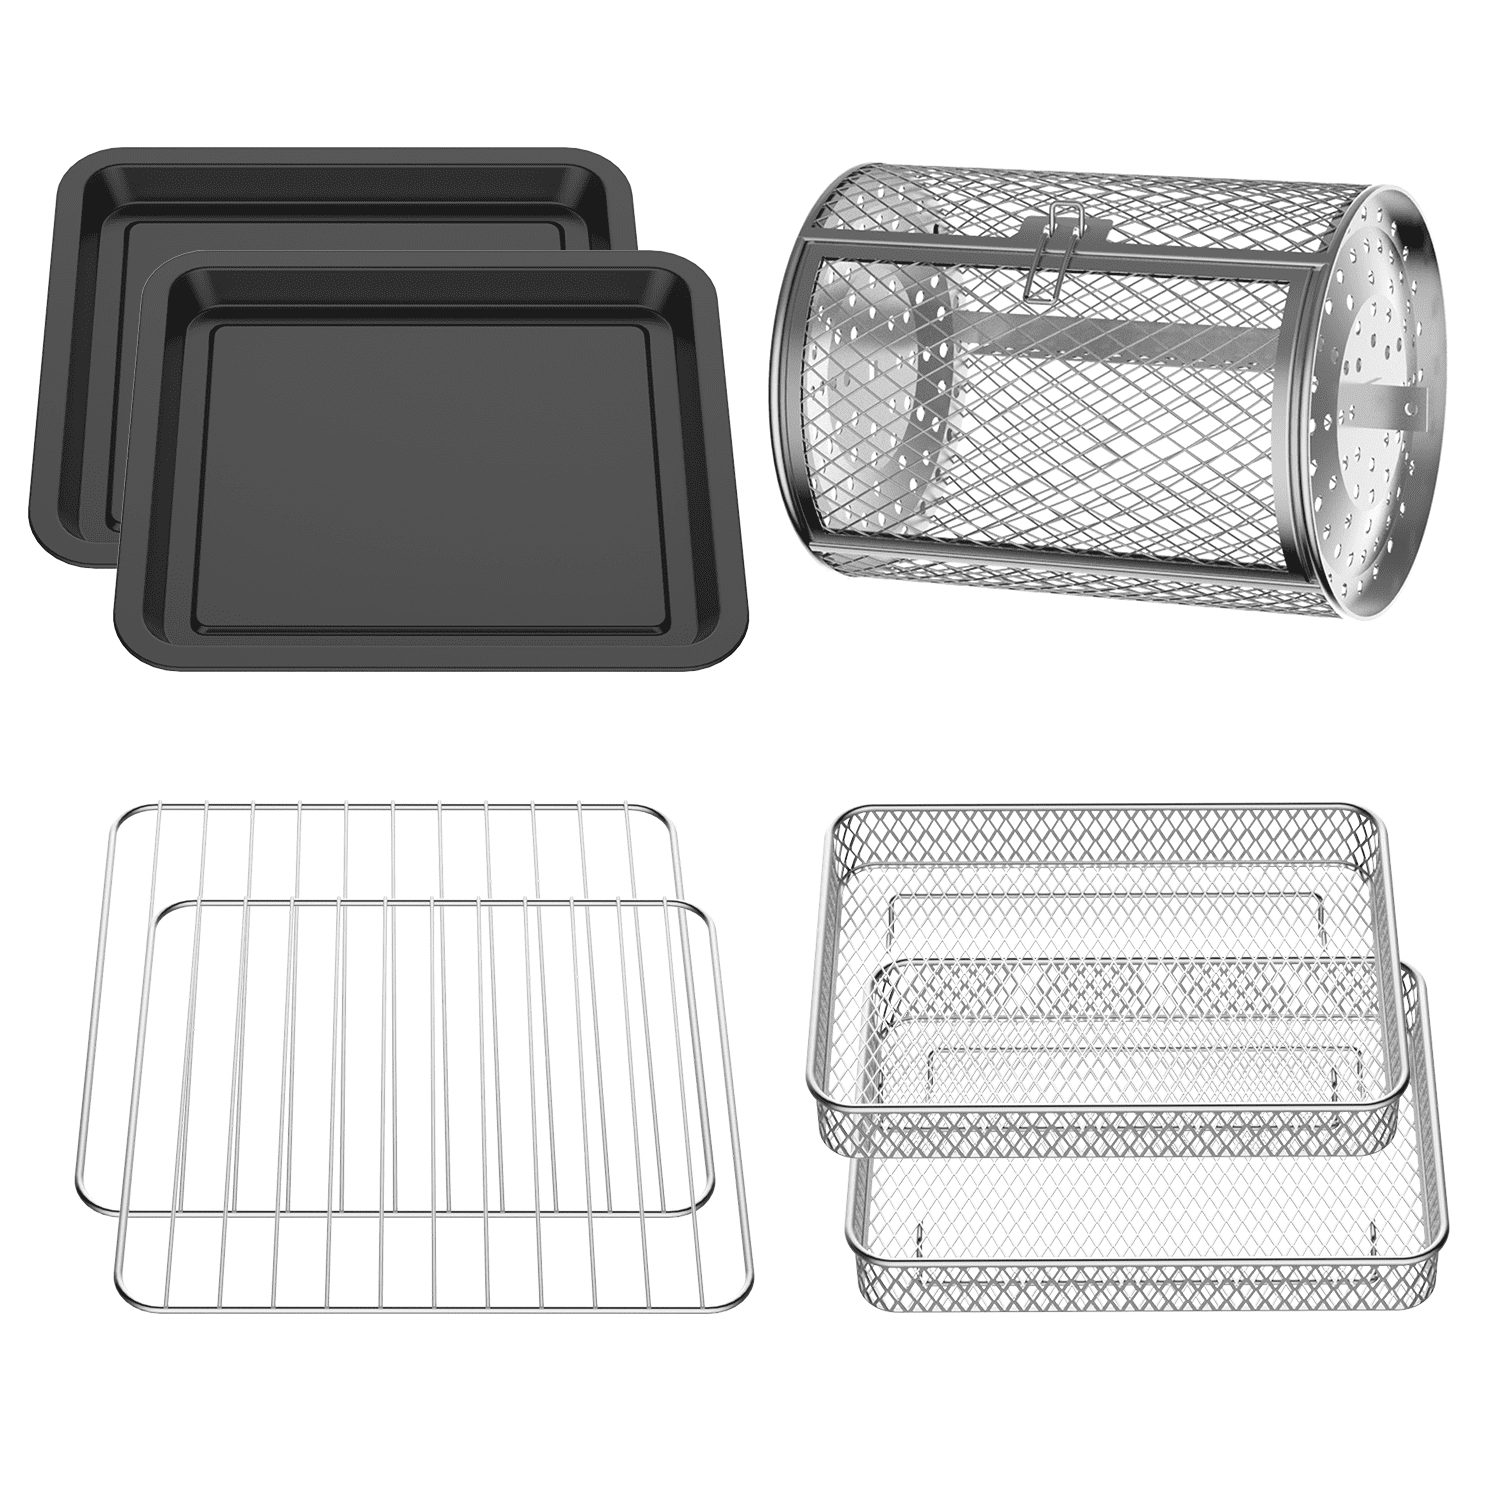 7-Pieces Air Fryer Oven Accessories Kit for Multi Brands, Rotisseries Drum,  Baking Rack, Air Fryer Basket, Baking Tray, Easy Clean, Black Silver